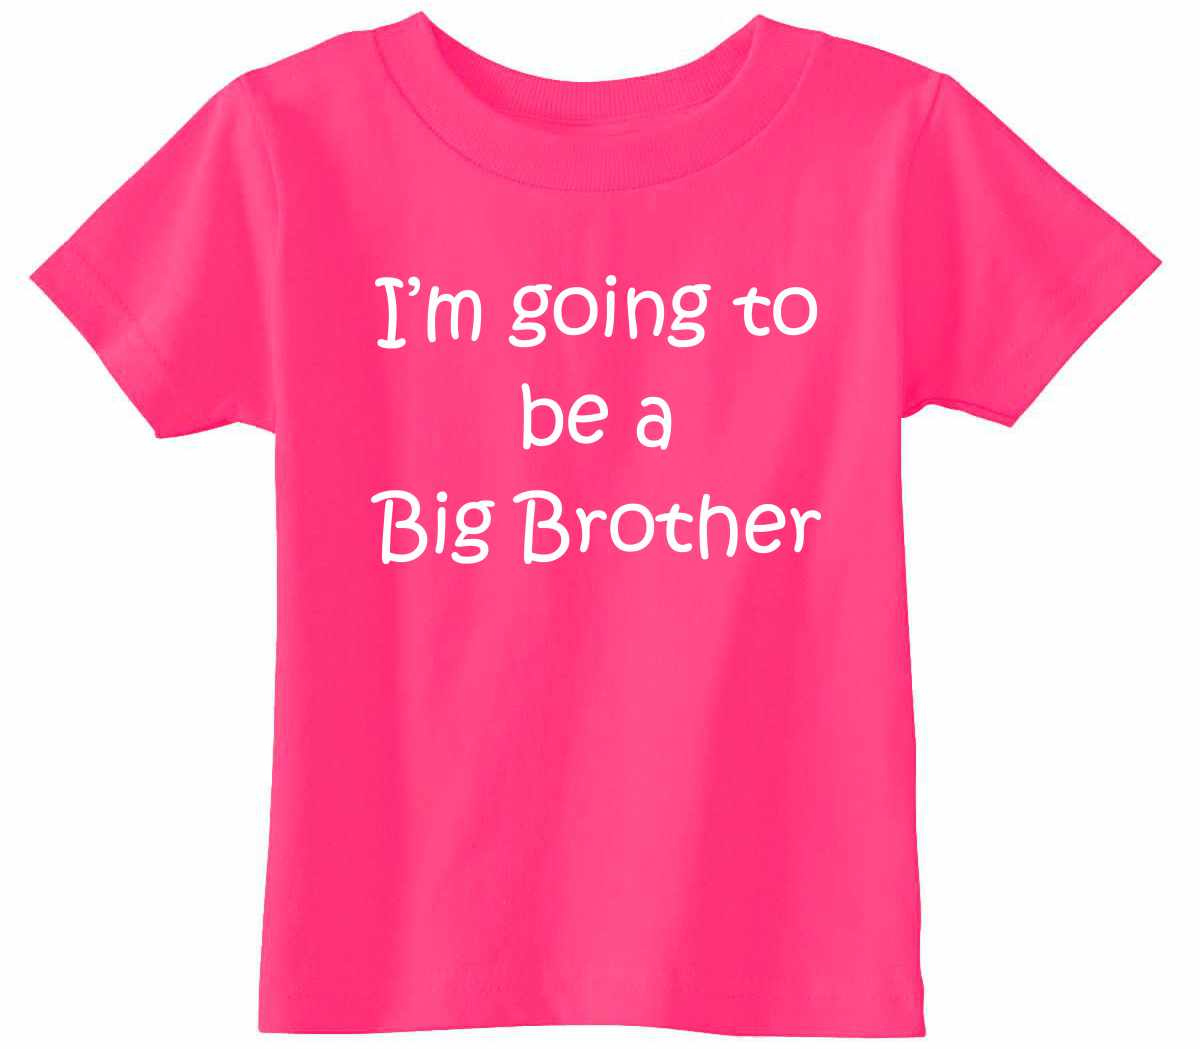 I'M GOING TO BE A BIG BROTHER Infant/Toddler  (#517-7)